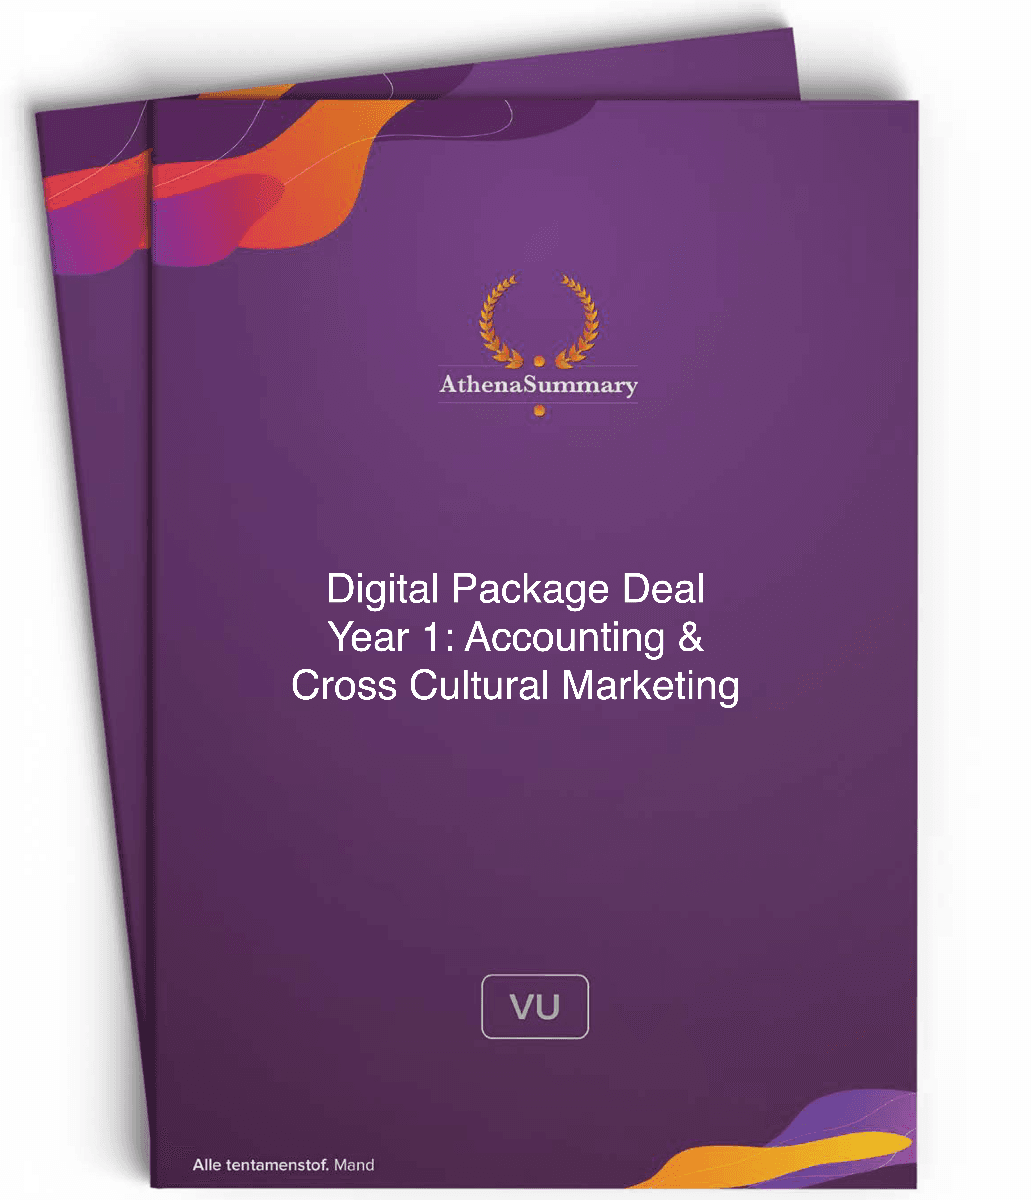 Digital Package deal year 1: Accounting & Cross Cultural Marketing 